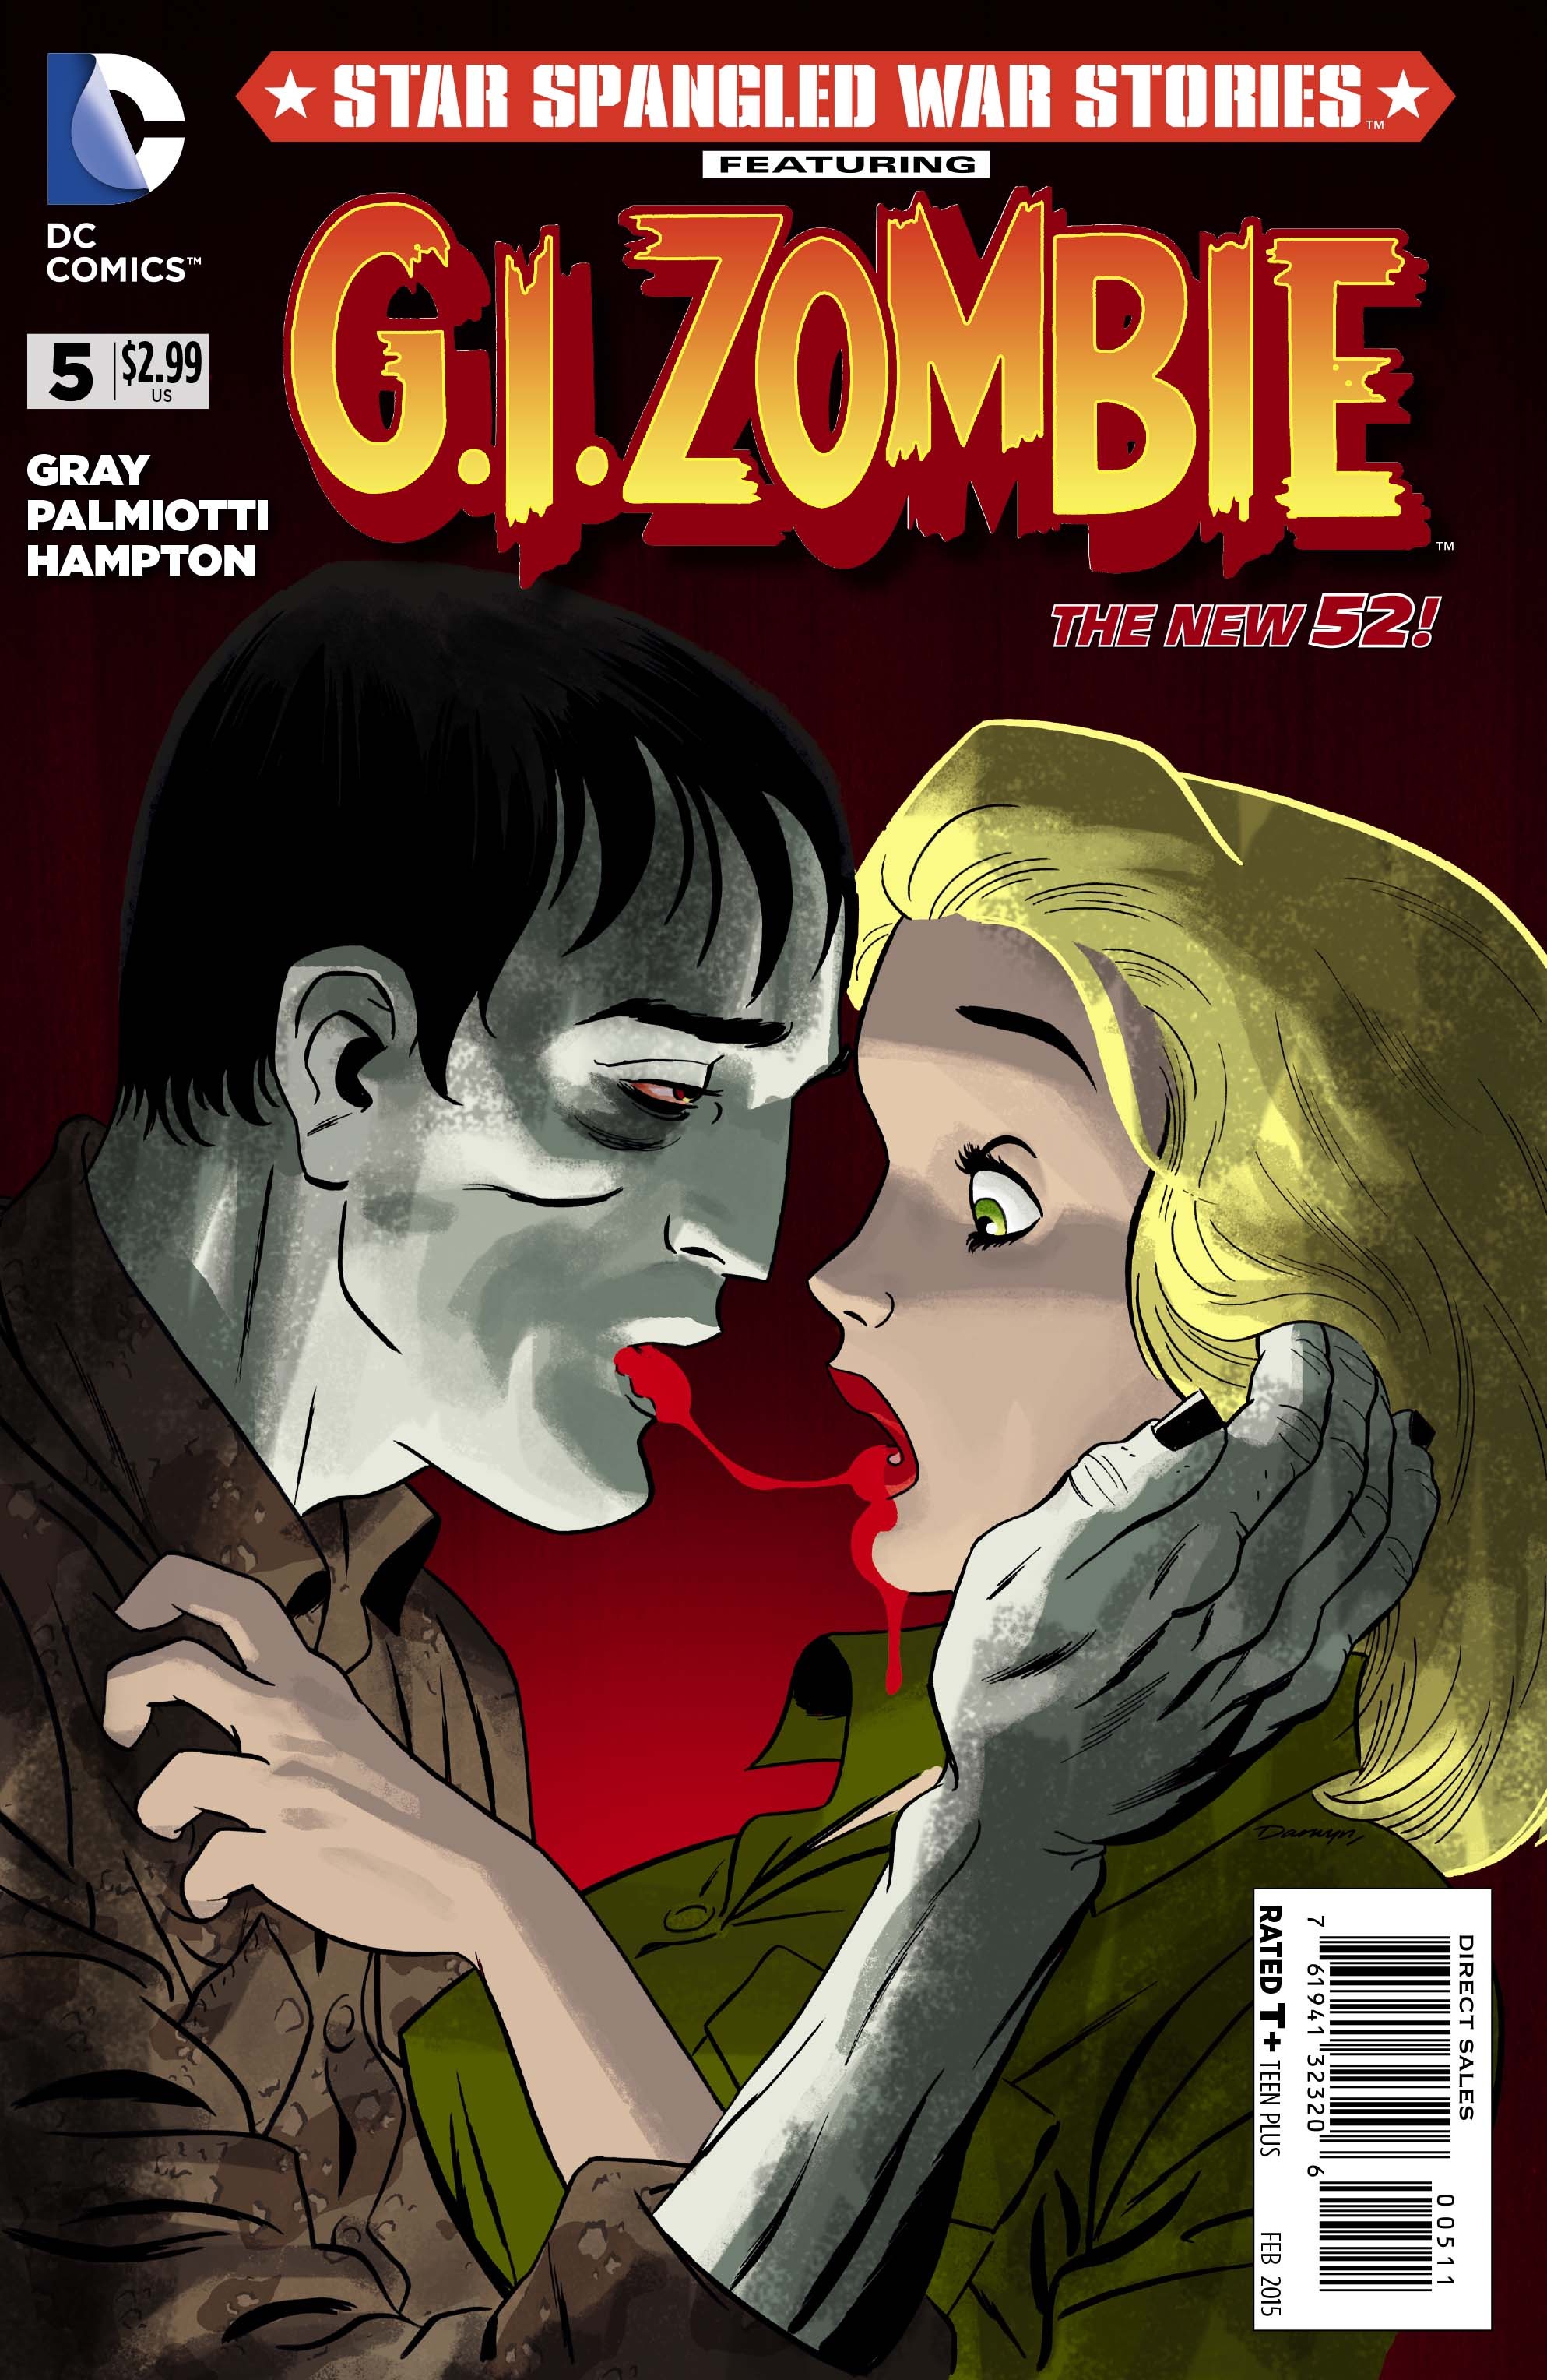 Star-Spangled War Stories Featuring G.I. Zombie Vol. 1 #5